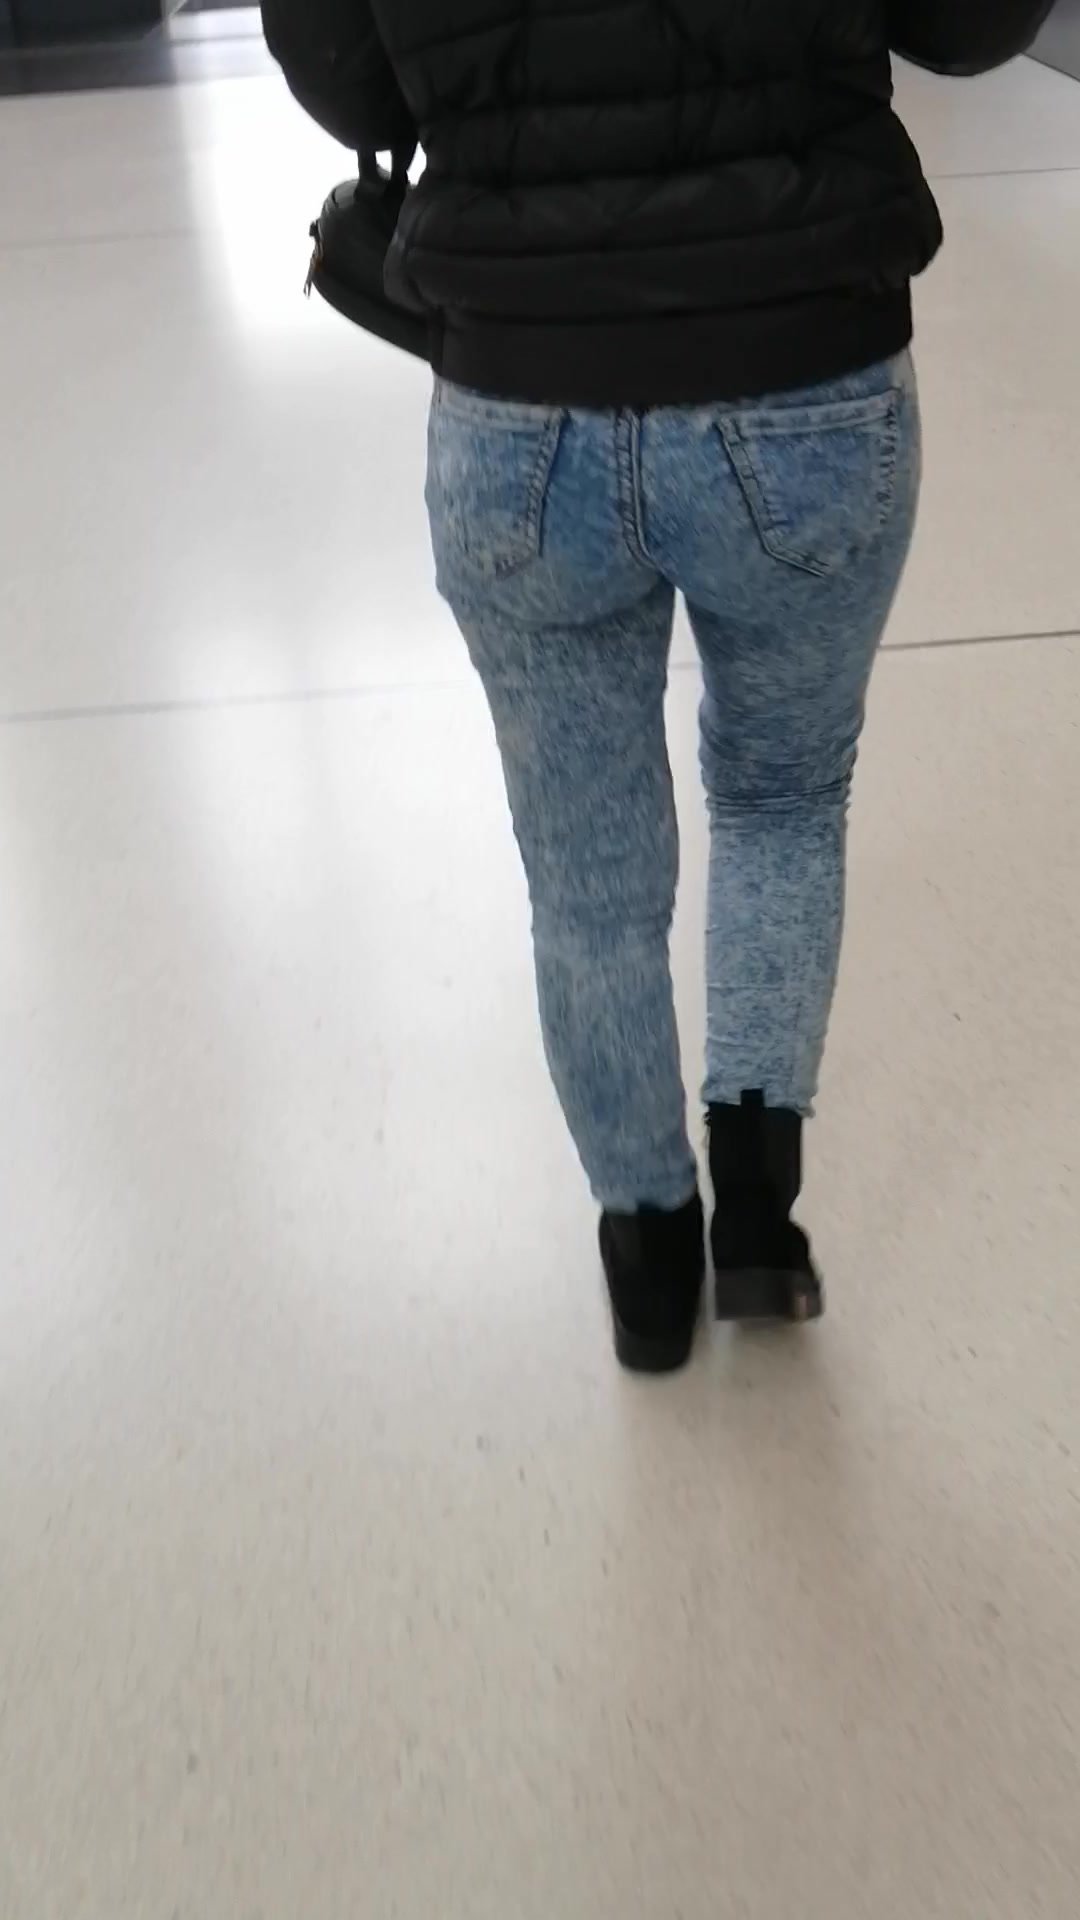 Girl with great ass walking